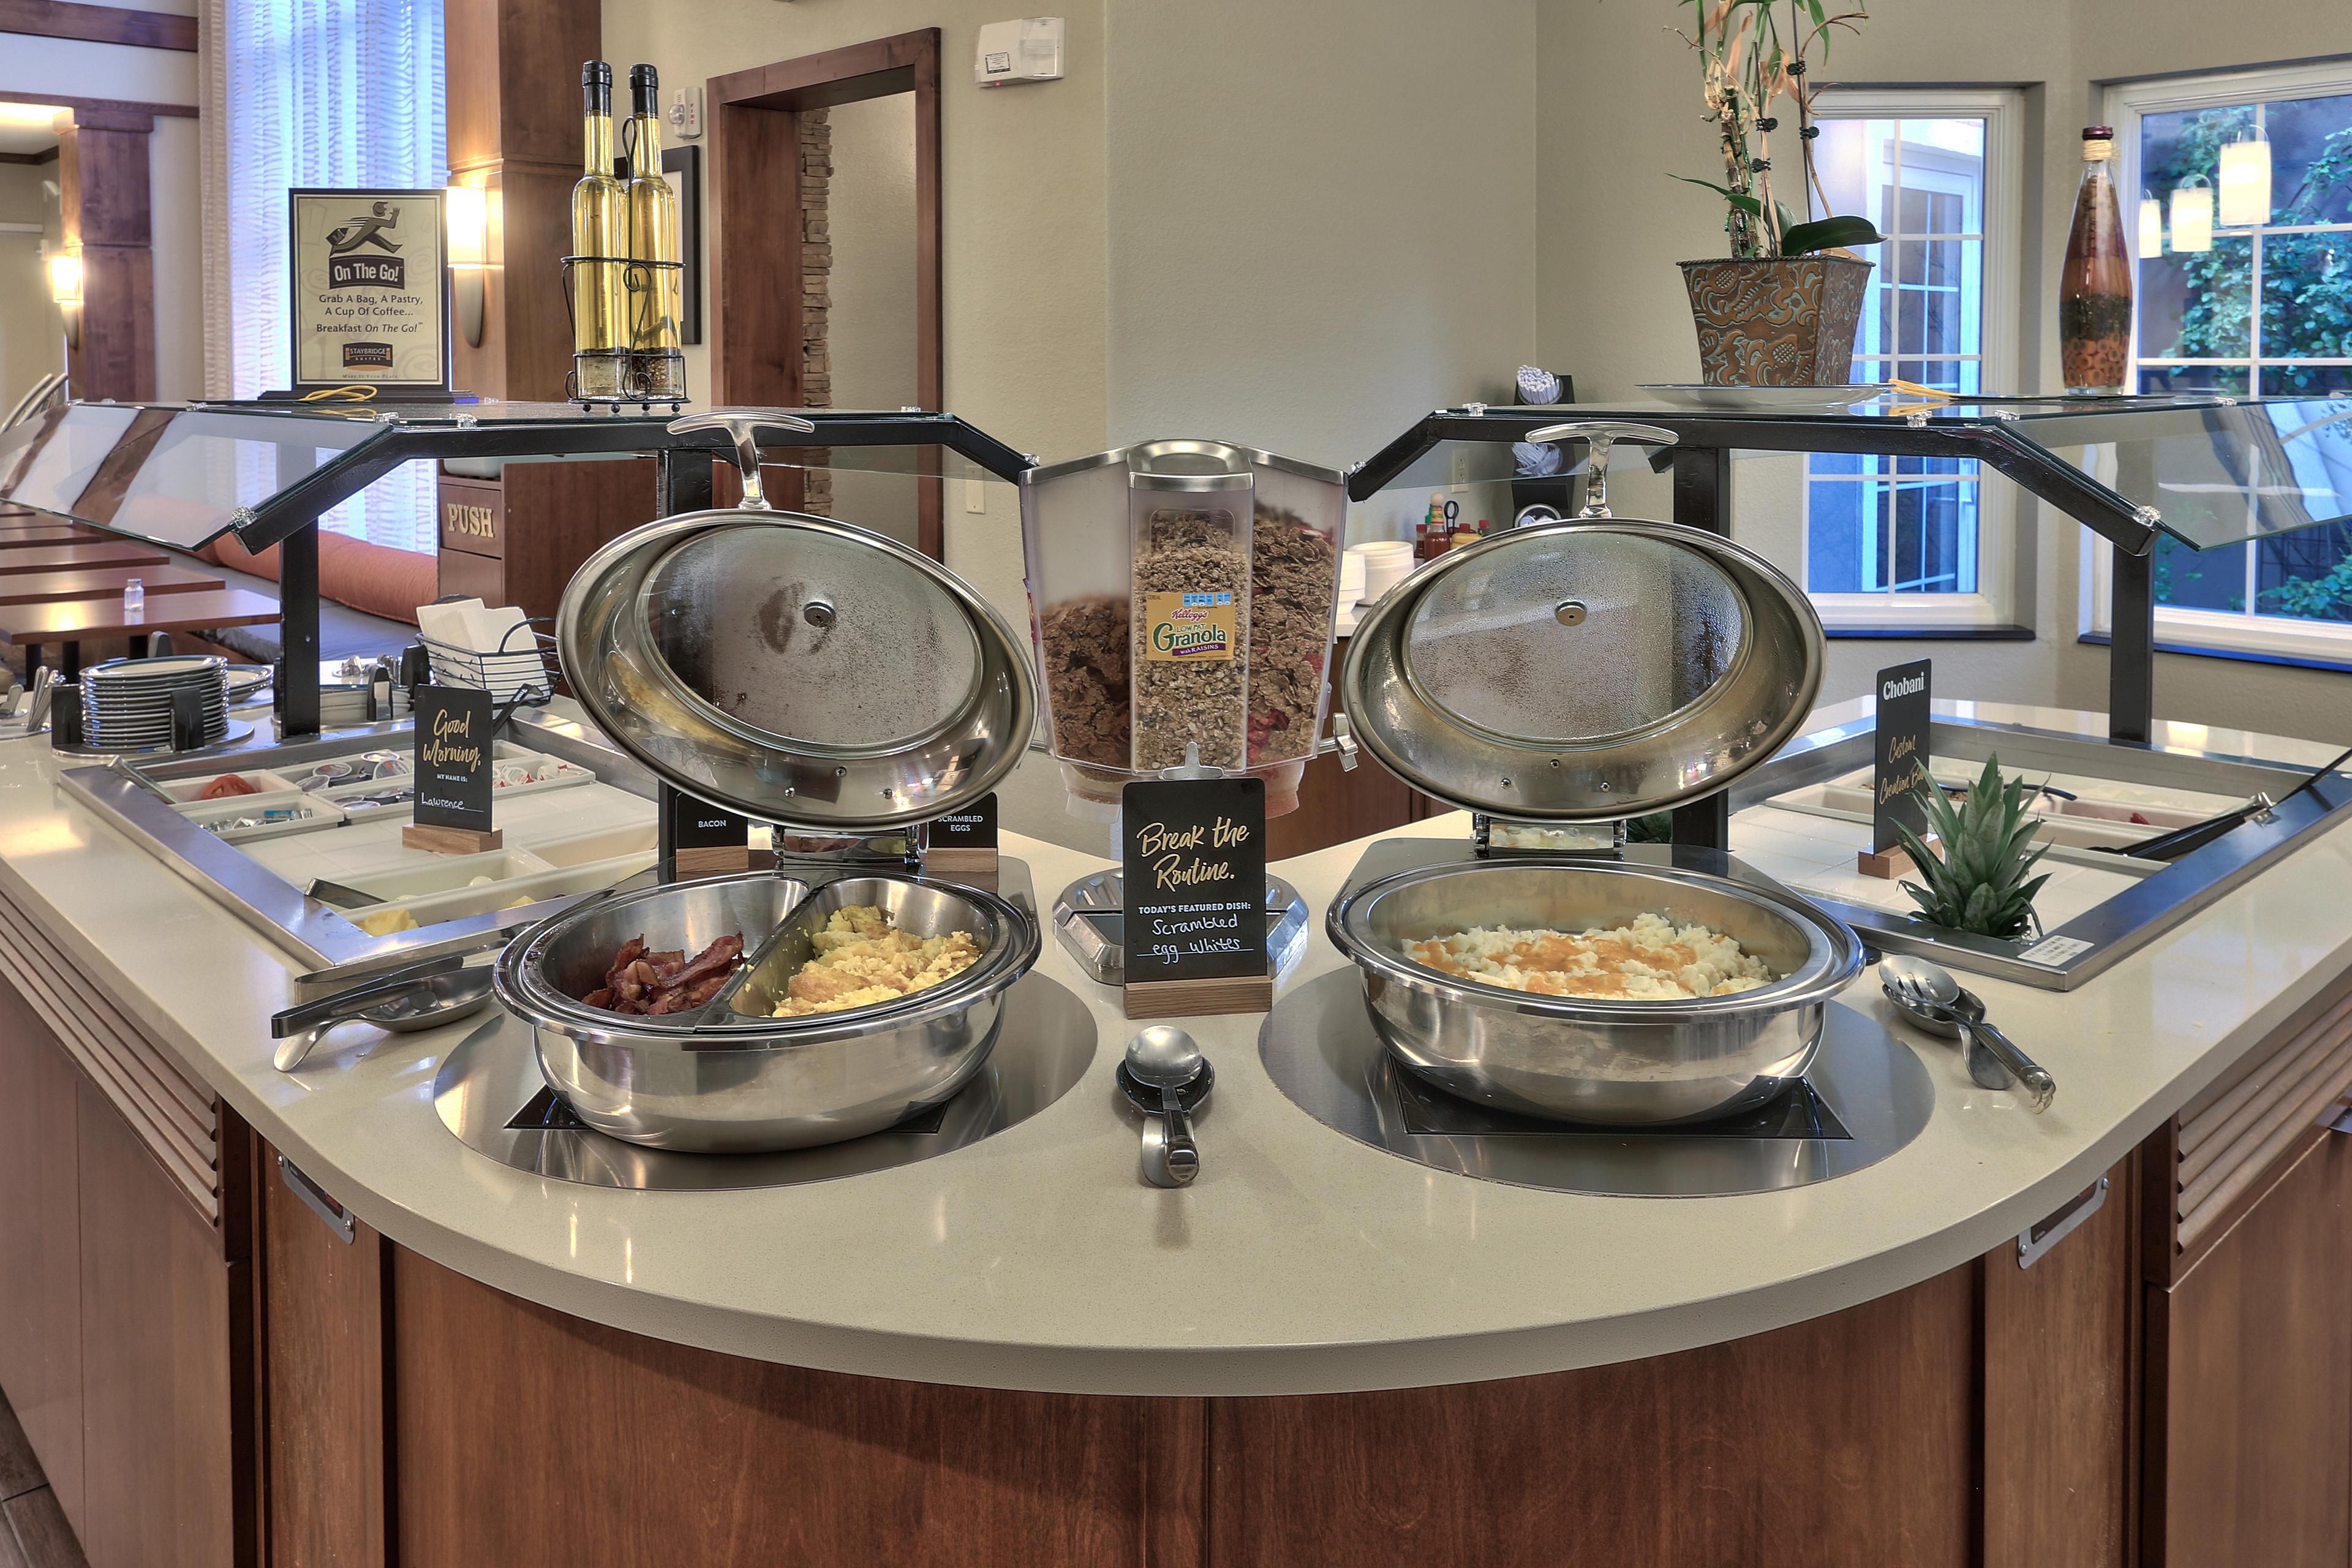 Start your day off right with our hot breakfast served daily starting at 6:30am - 9:30am Monday - Friday and 7:30am - 10:30am Saturday & Sunday. Enjoy freshly baked blueberry muffins! Friday’s, enjoy red or green chili cheese enchiladas.